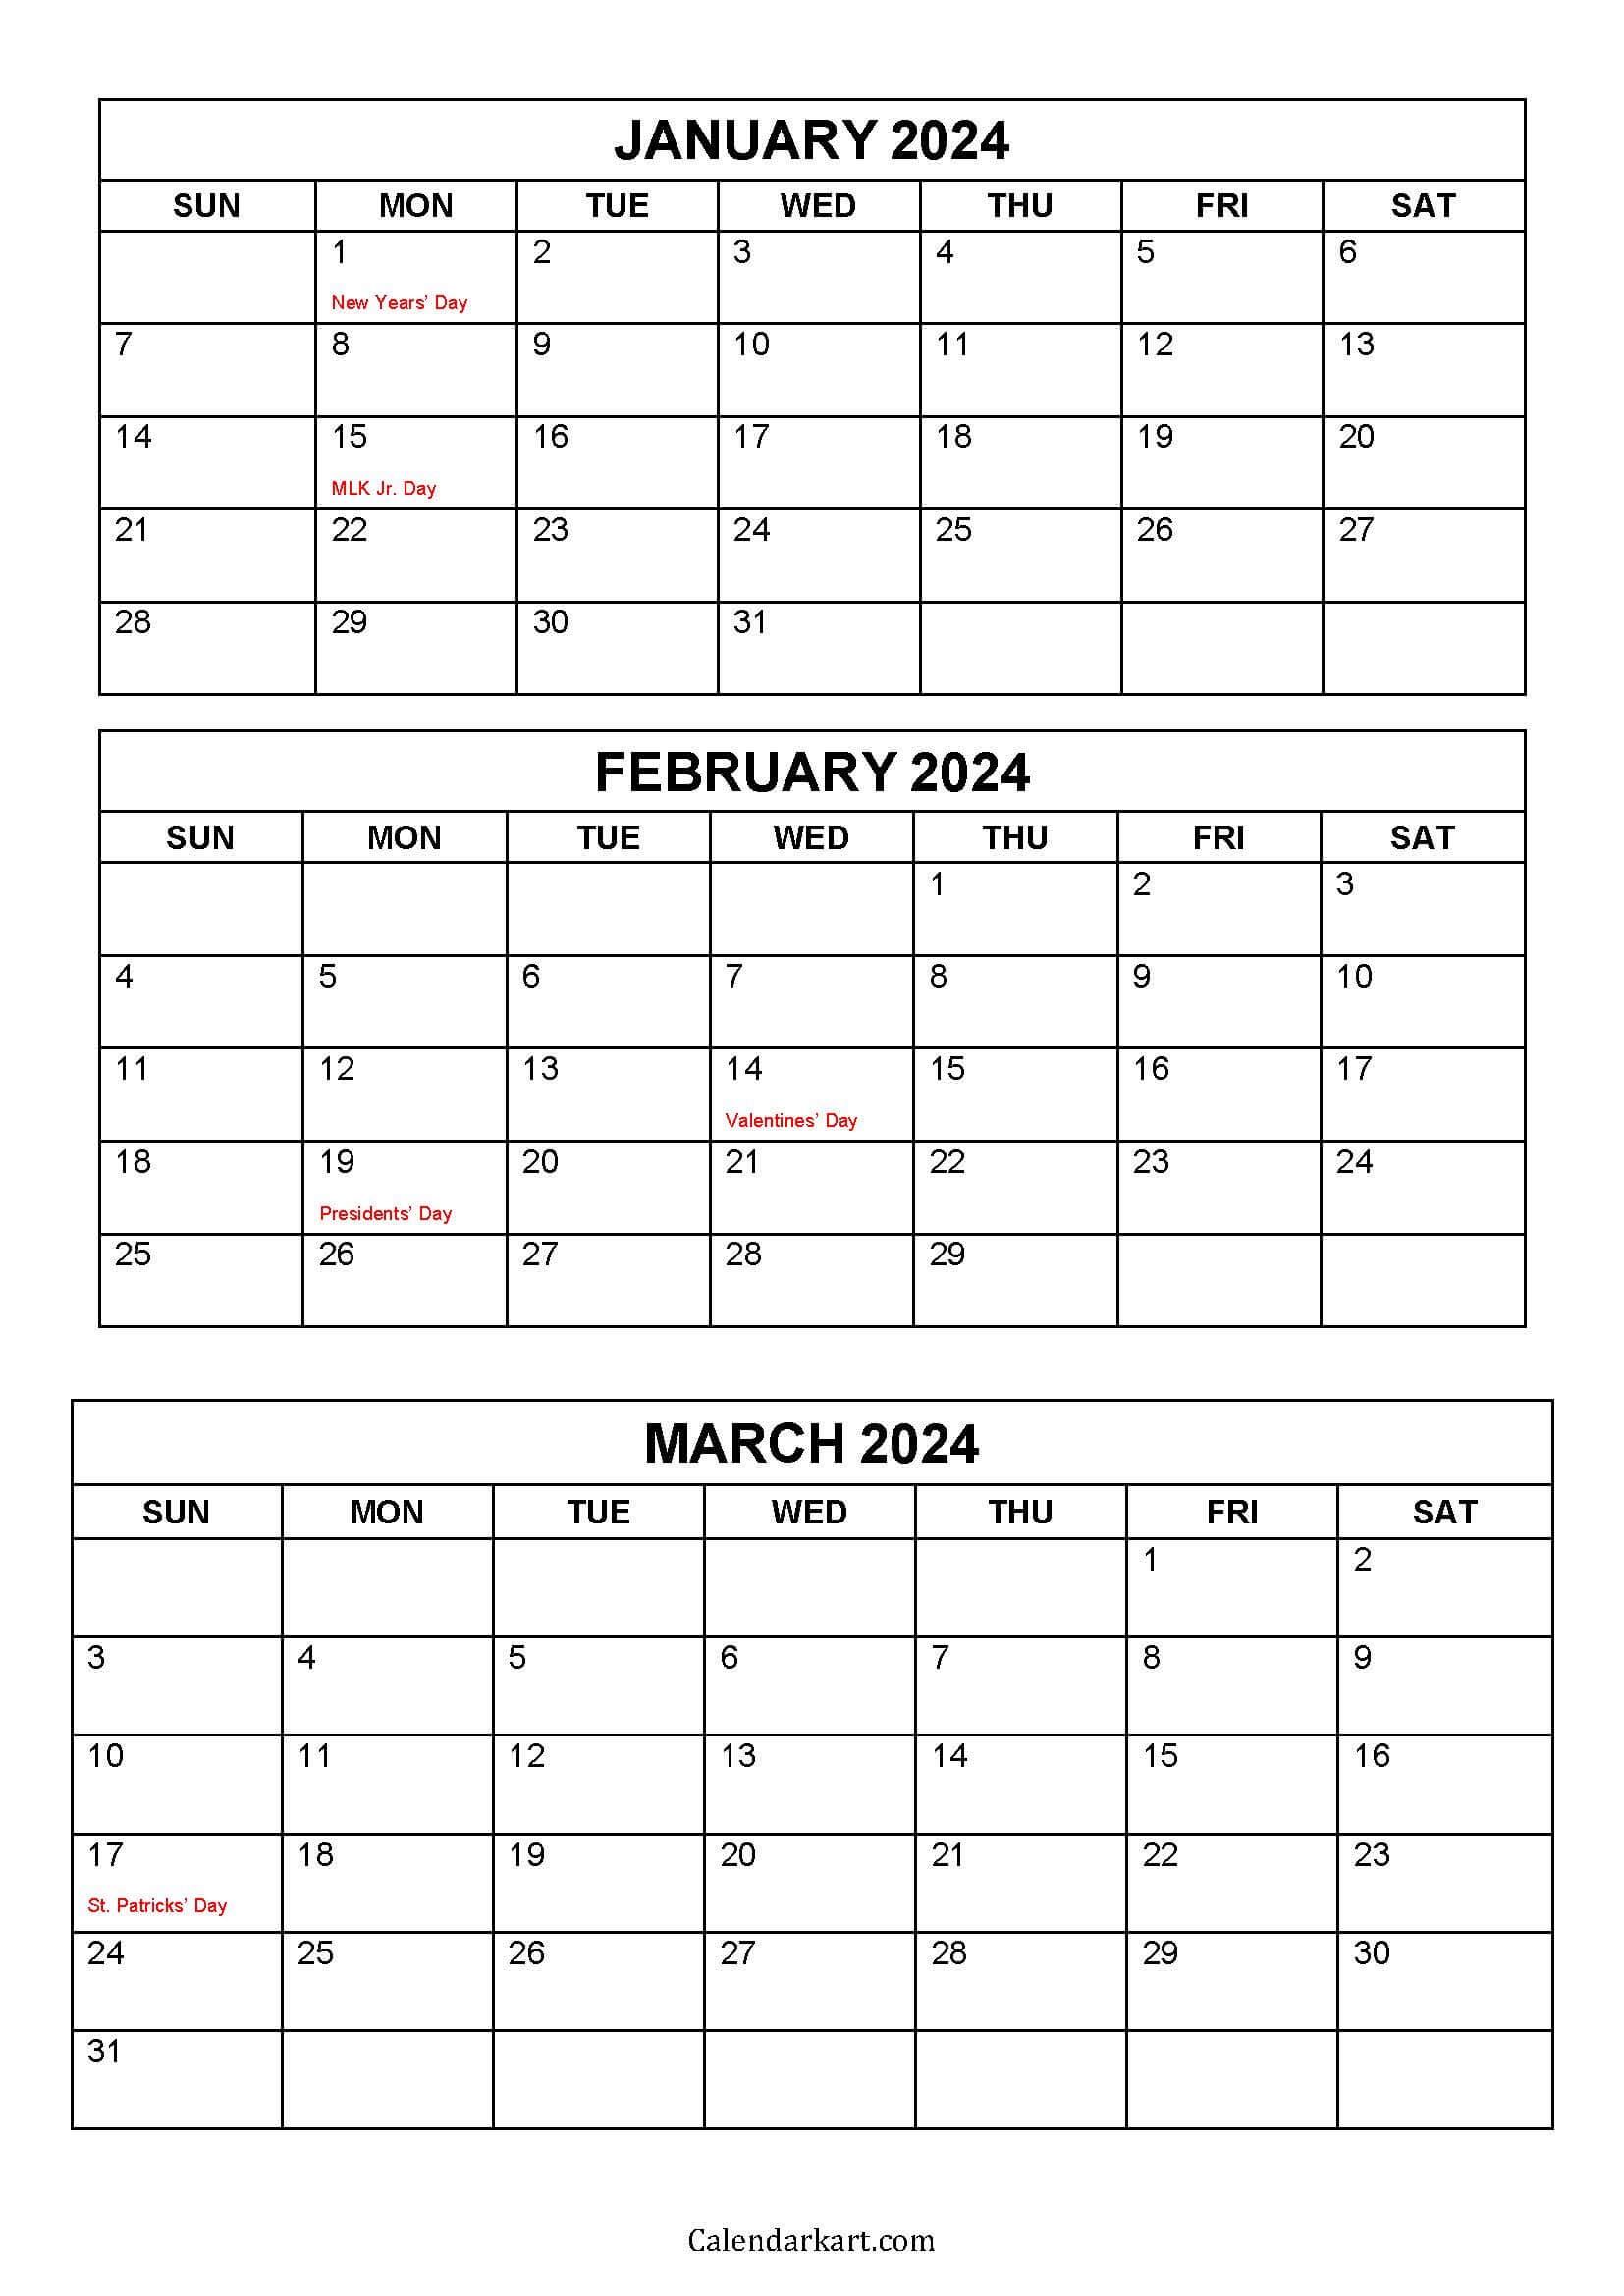 Free Printable January To March 2024 Calendar - Calendarkart for Free Printable Calendar 2024 3 Months Per Page